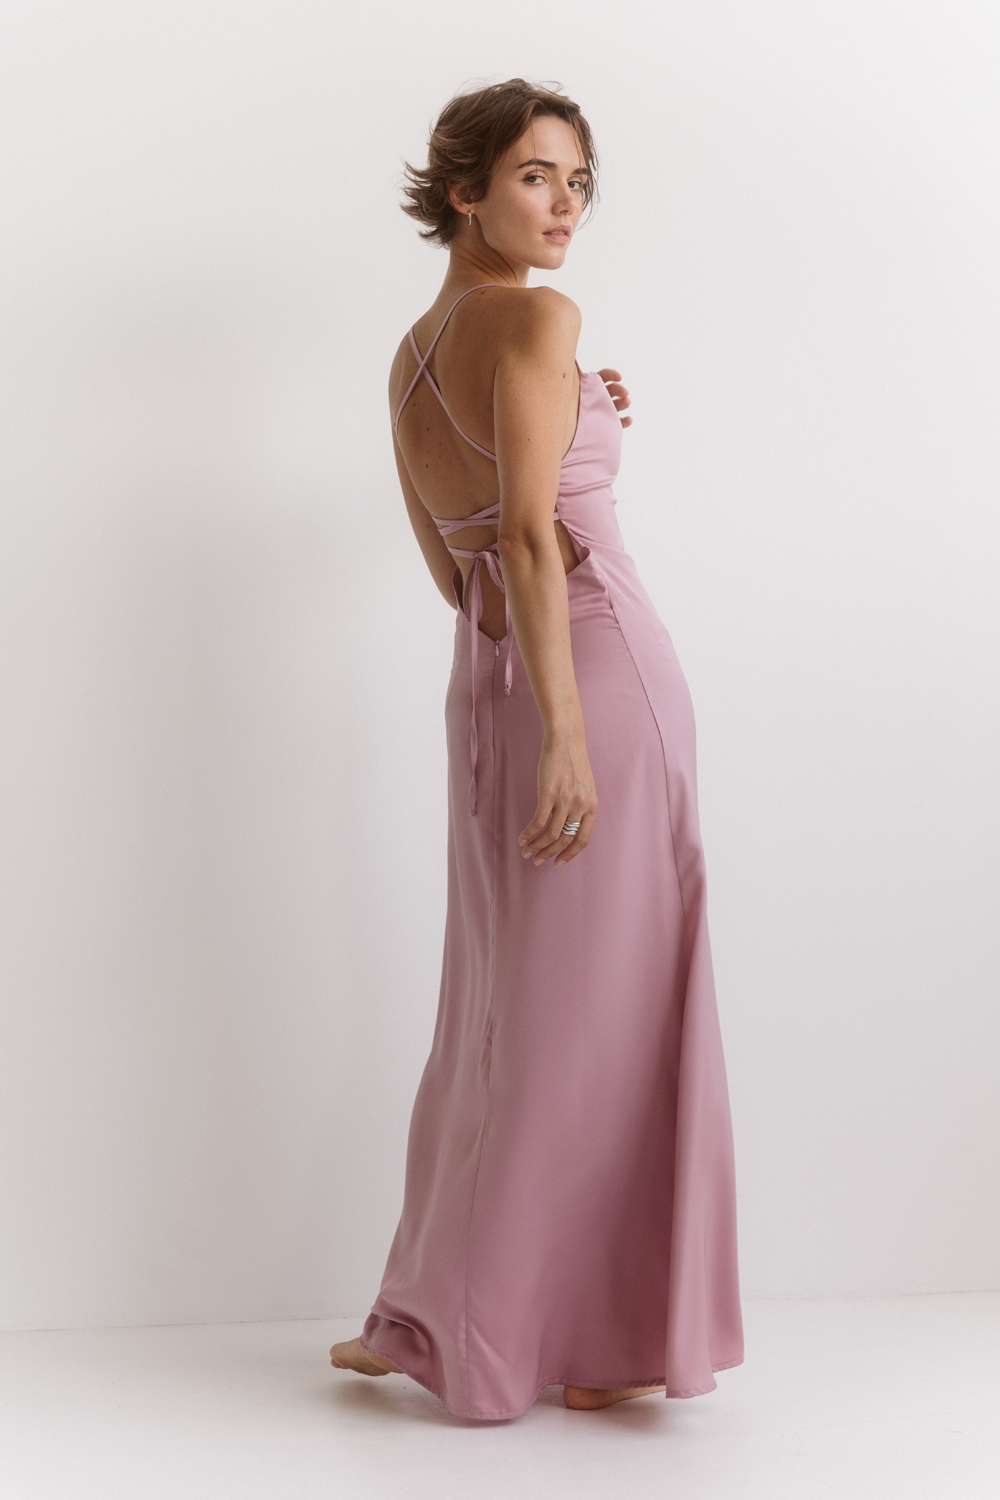 Satin dress in linen style with an open back in the color 